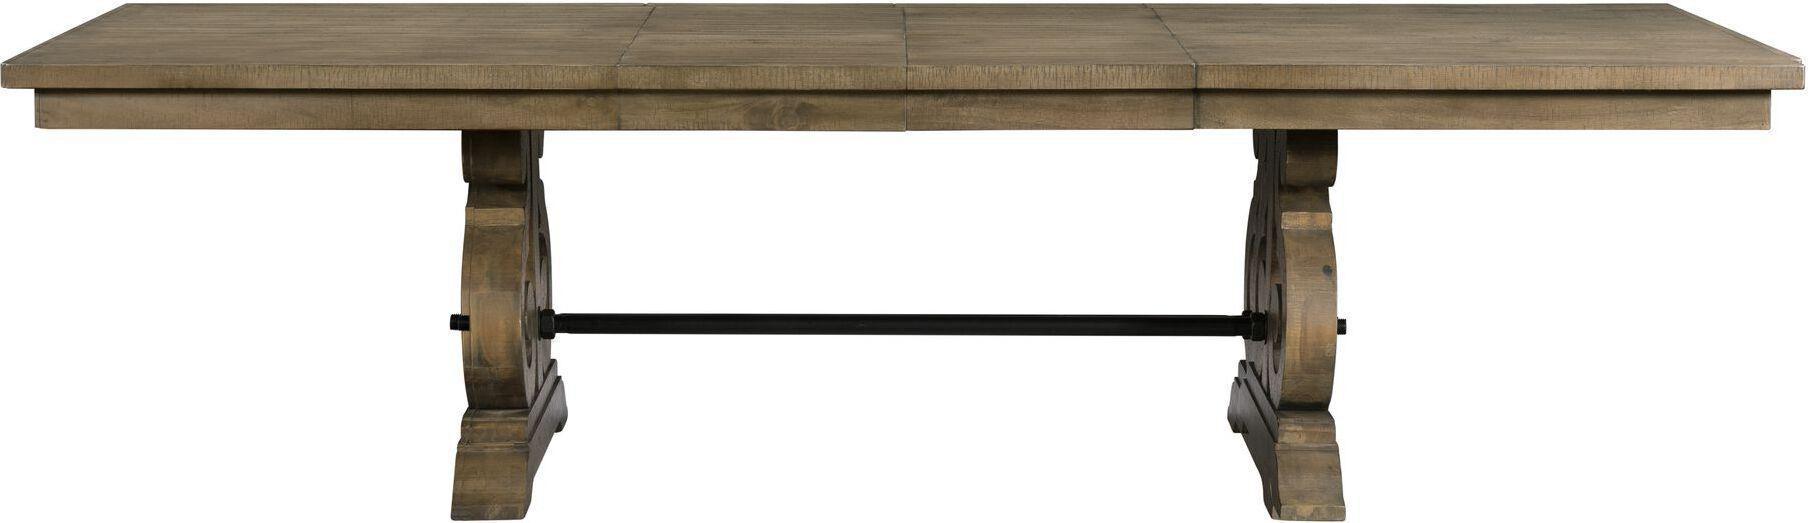 Elements Dining Tables - Stanford Standard Height Dining Table